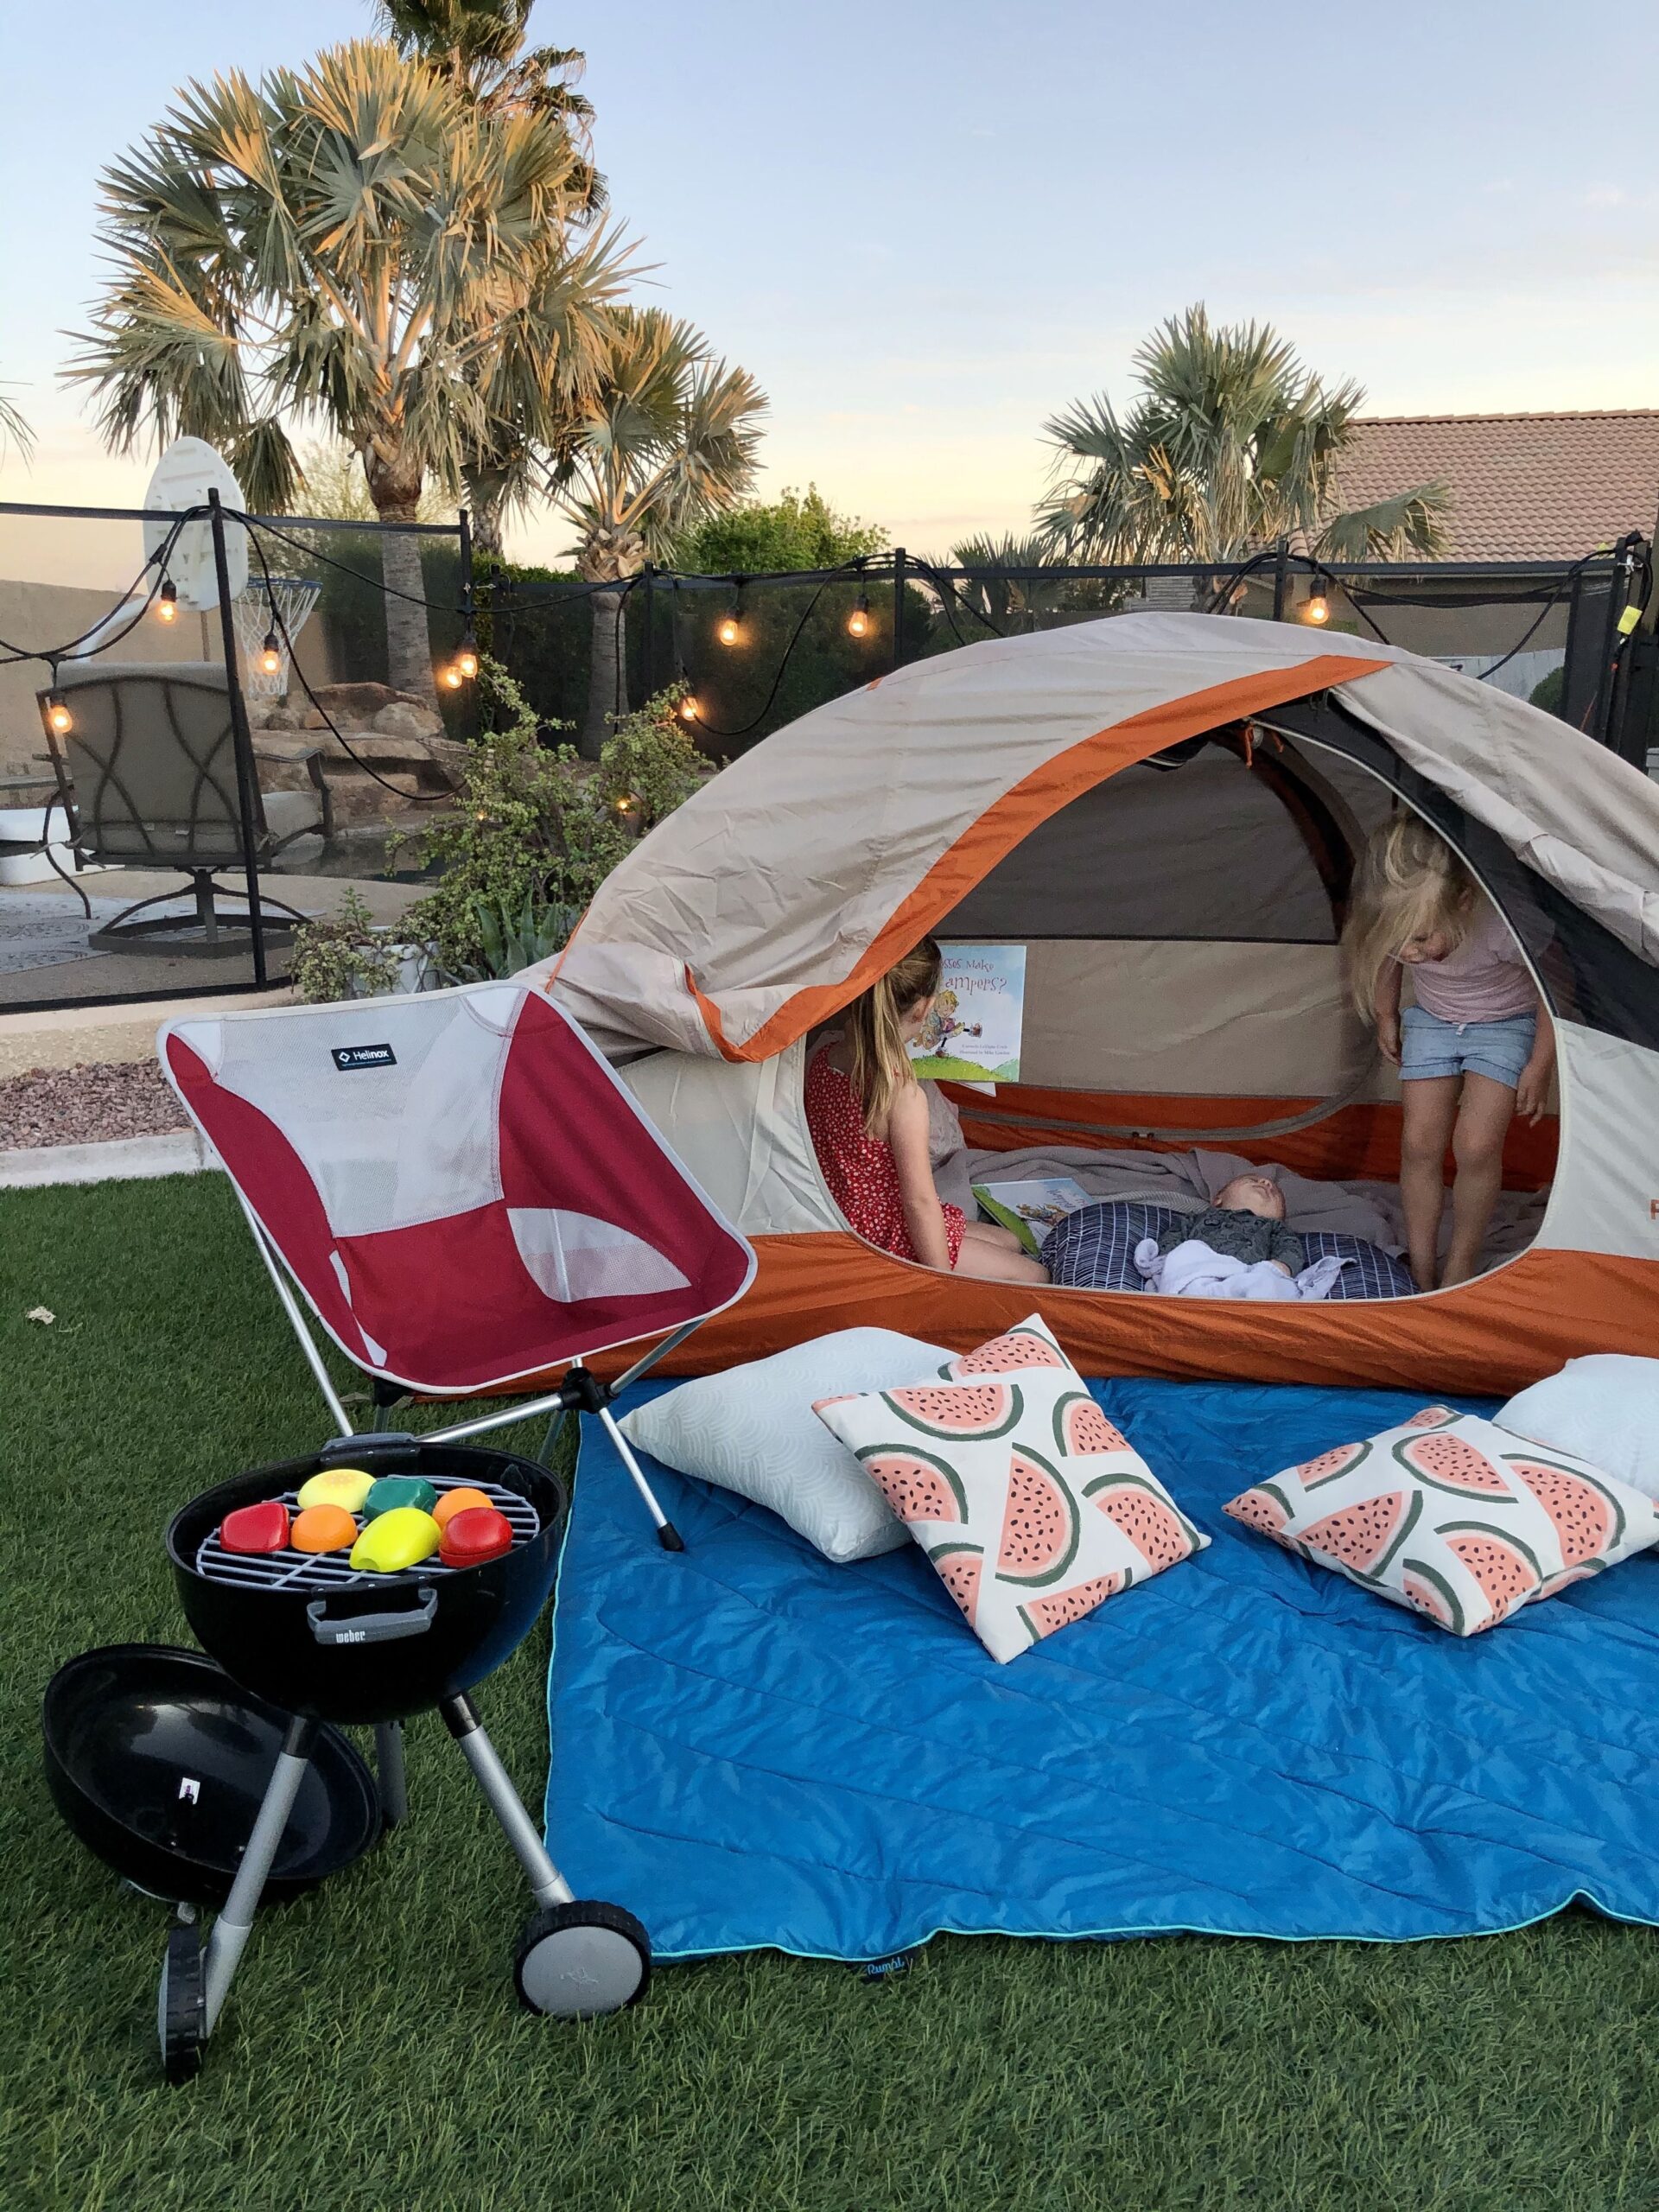 Backyard Camping The Perfect Staycation Option